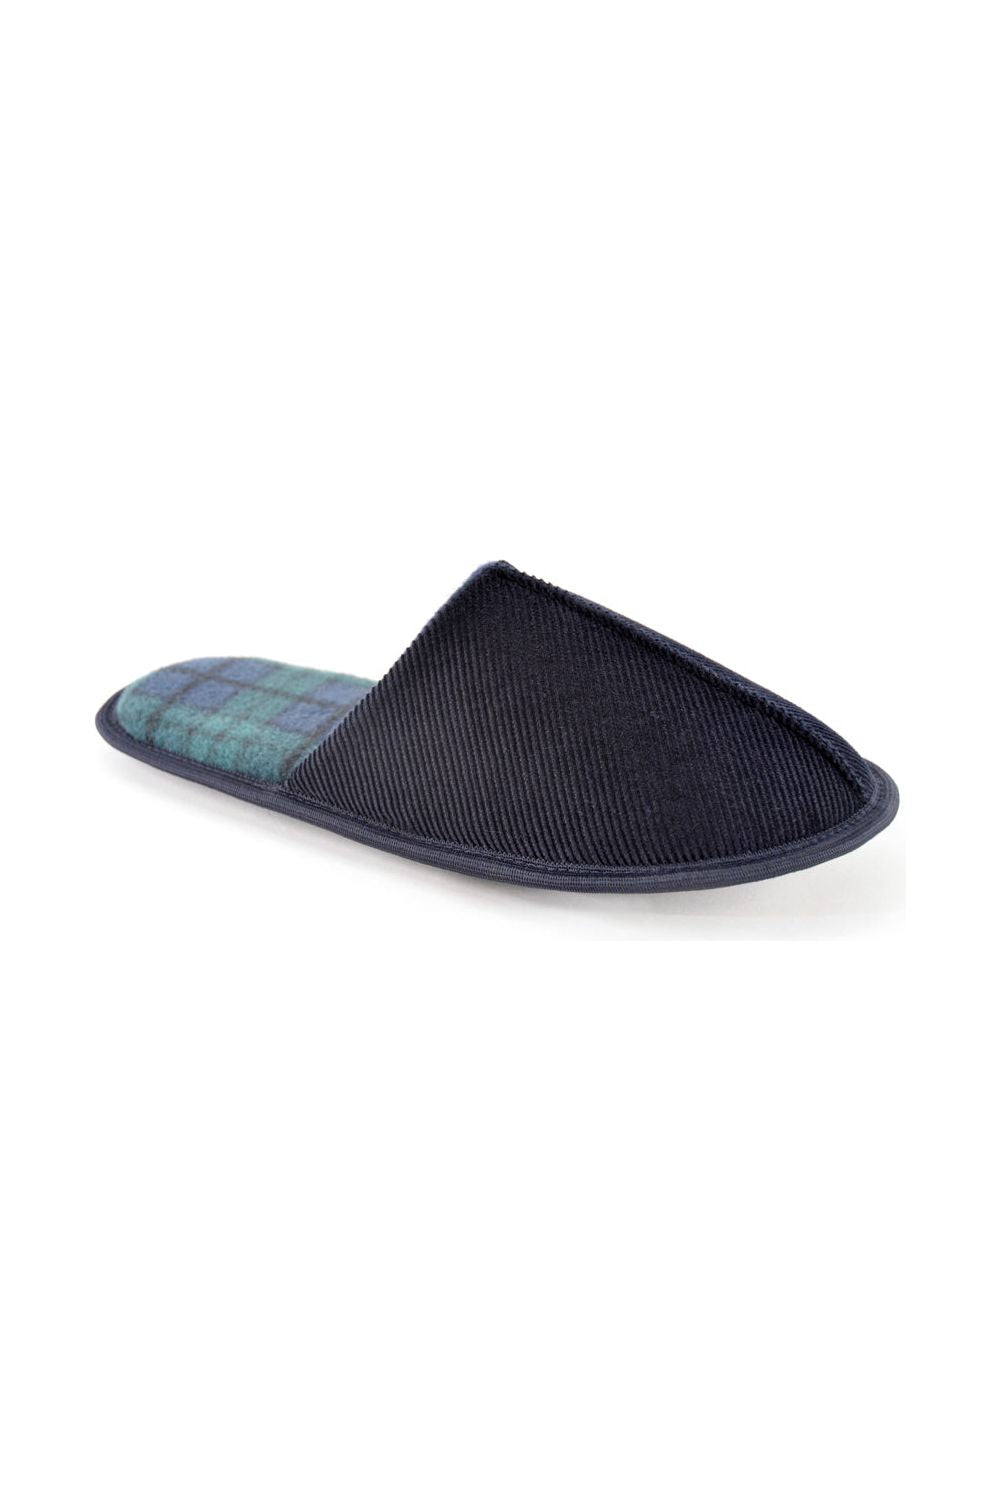 Mens Slip On Navy With Green Check Slippers